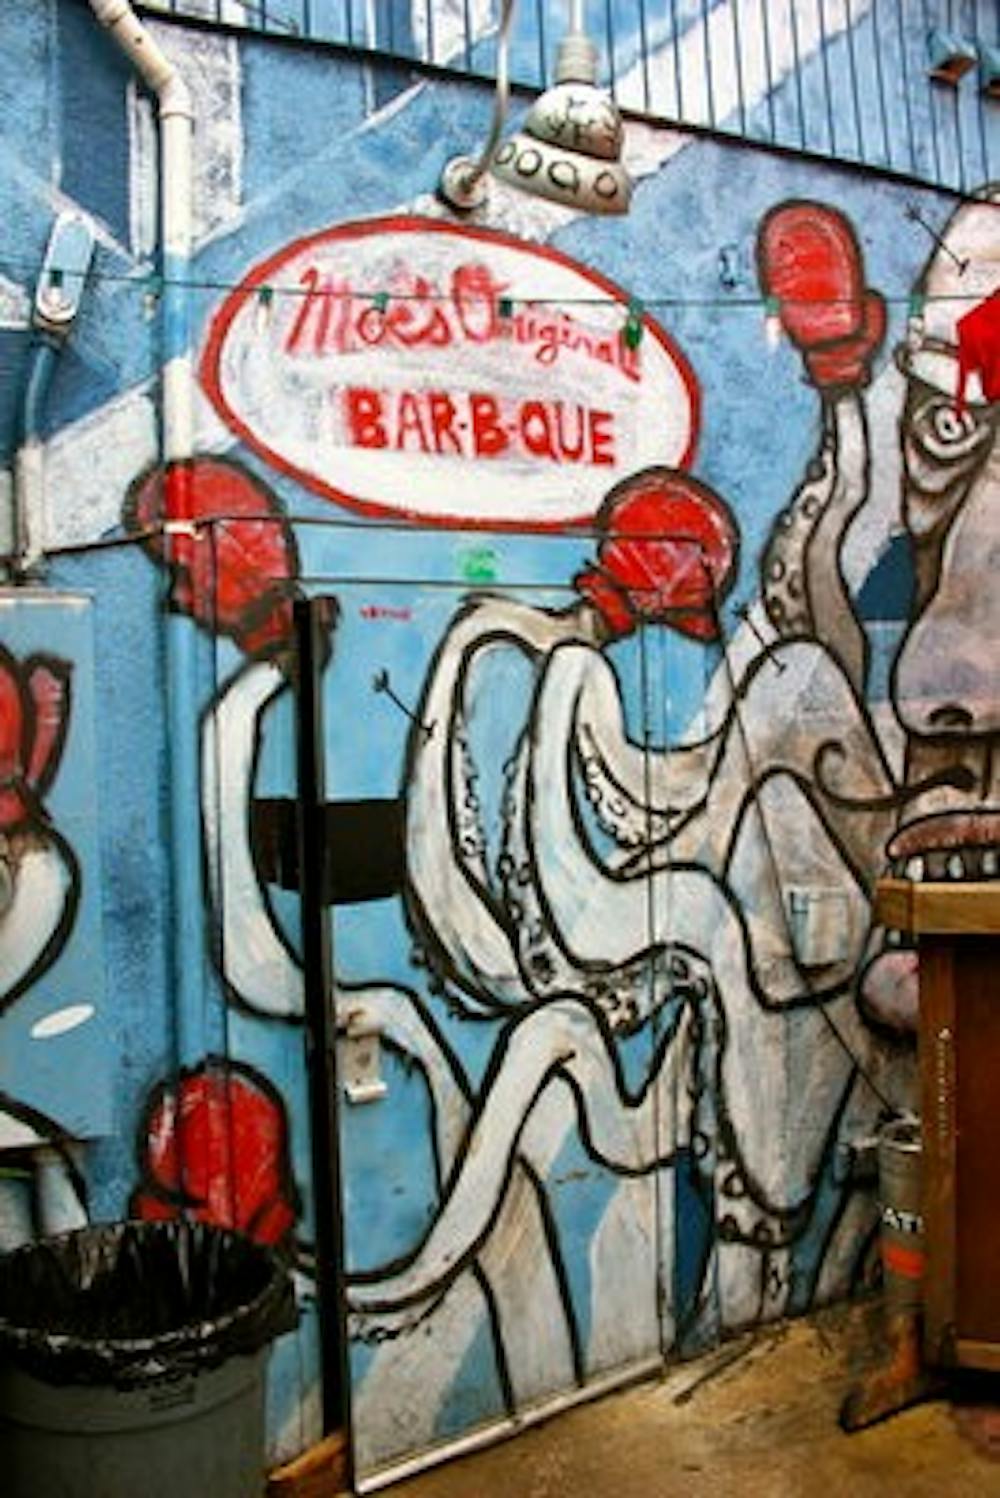 <p>The murals Christian Hamrick painted at Moe's Bar-B-Que are funky, one-of-a-kind anecdotes that cover the brick walls on the inside of the restaurant and outside on the back patio. (Courtesy of Chelsea Wooten)</p>